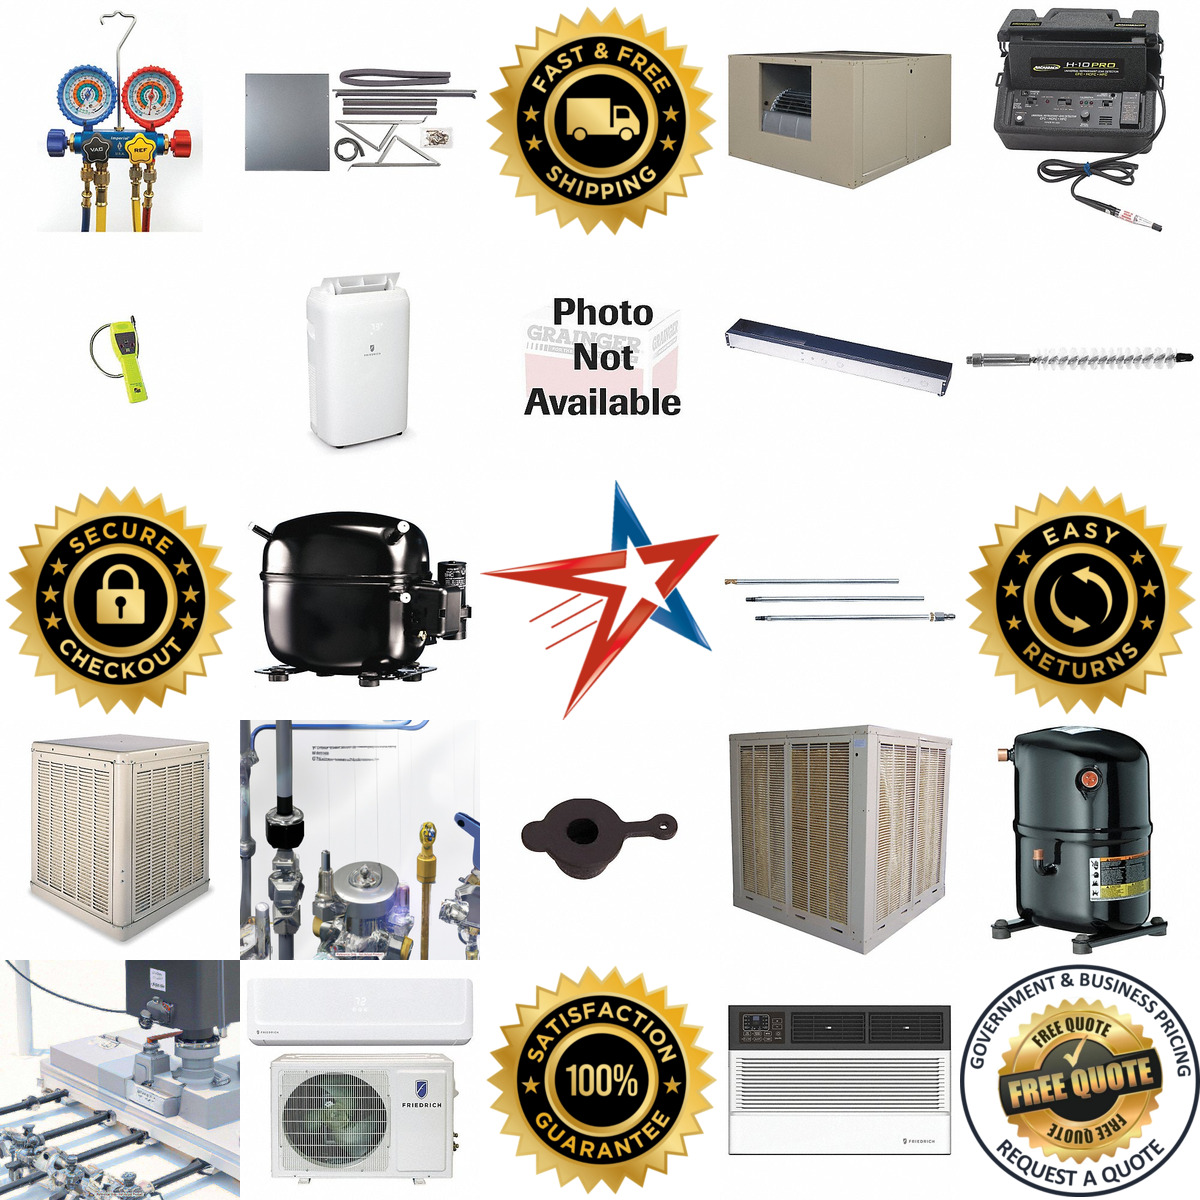 A selection of Air Conditioners and Accessories products on GoVets